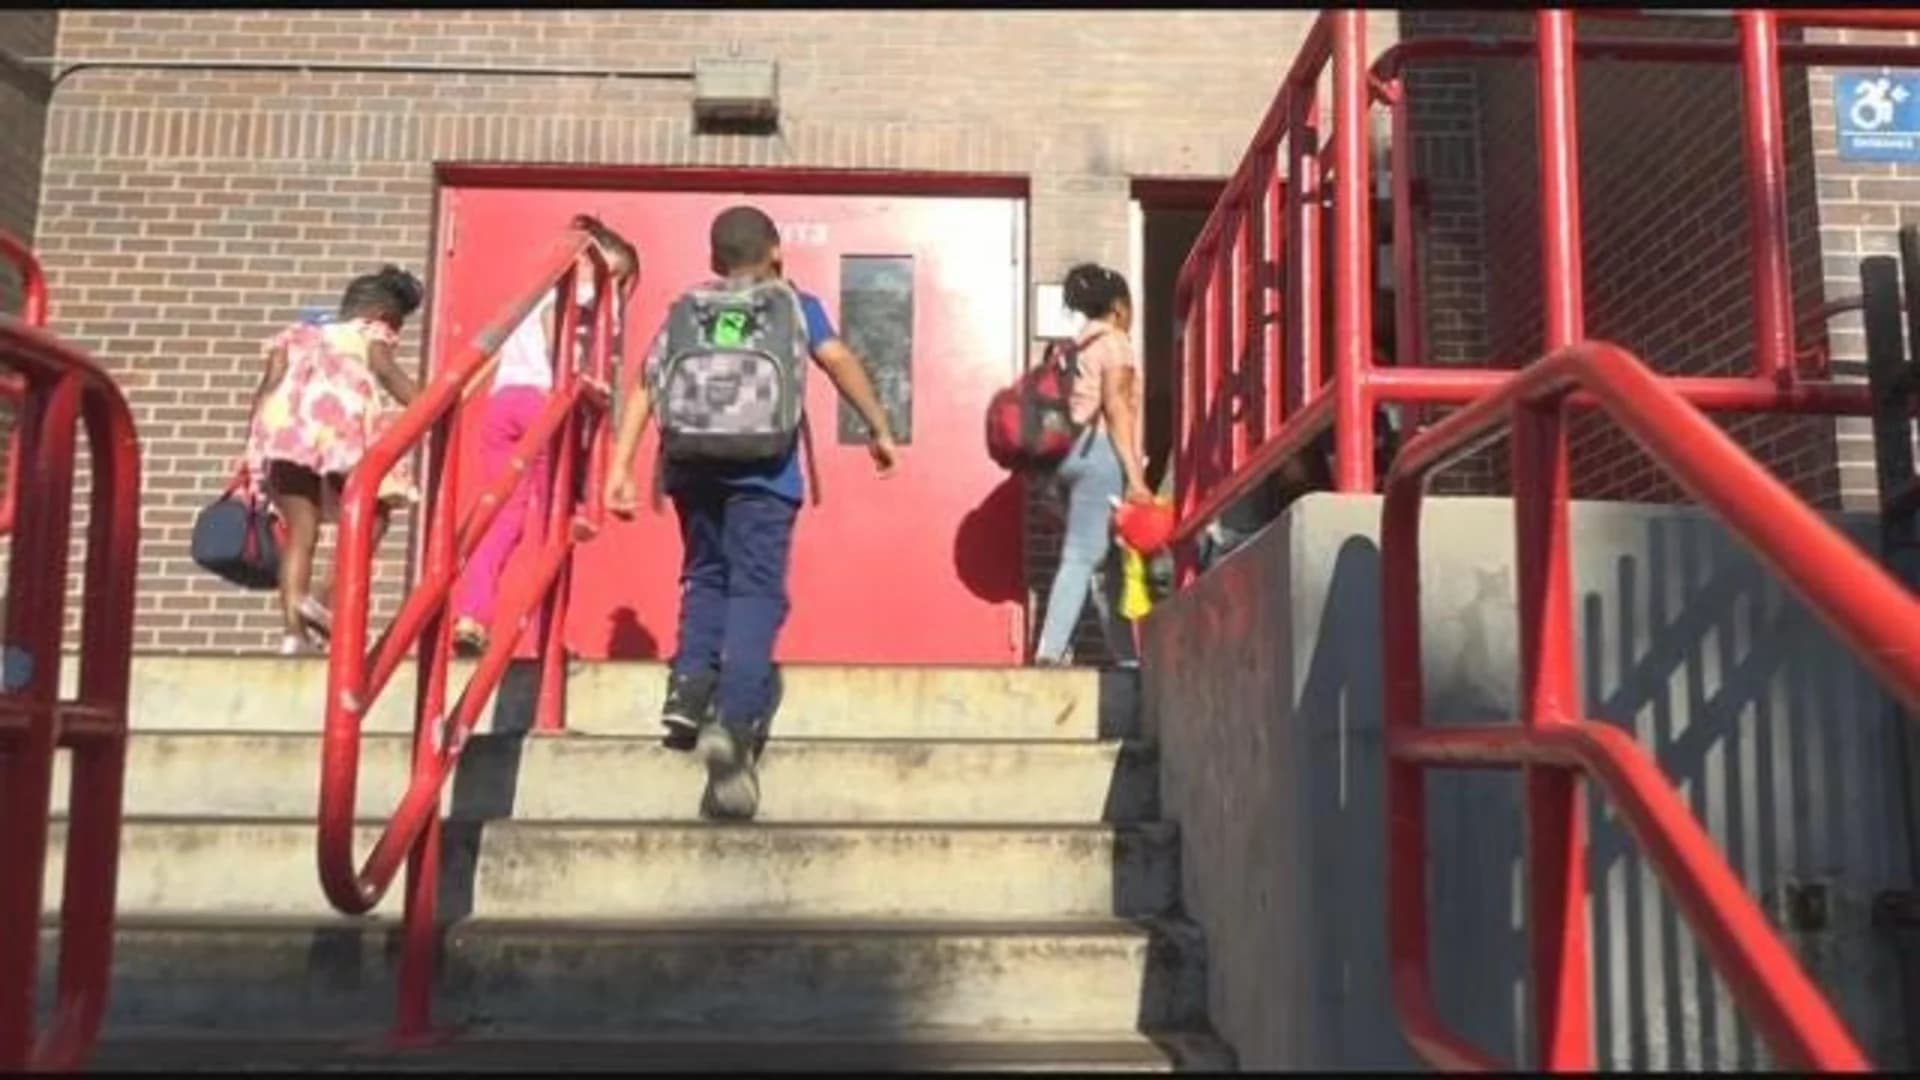 Schools out! Summer vacation begins for NYC public schools